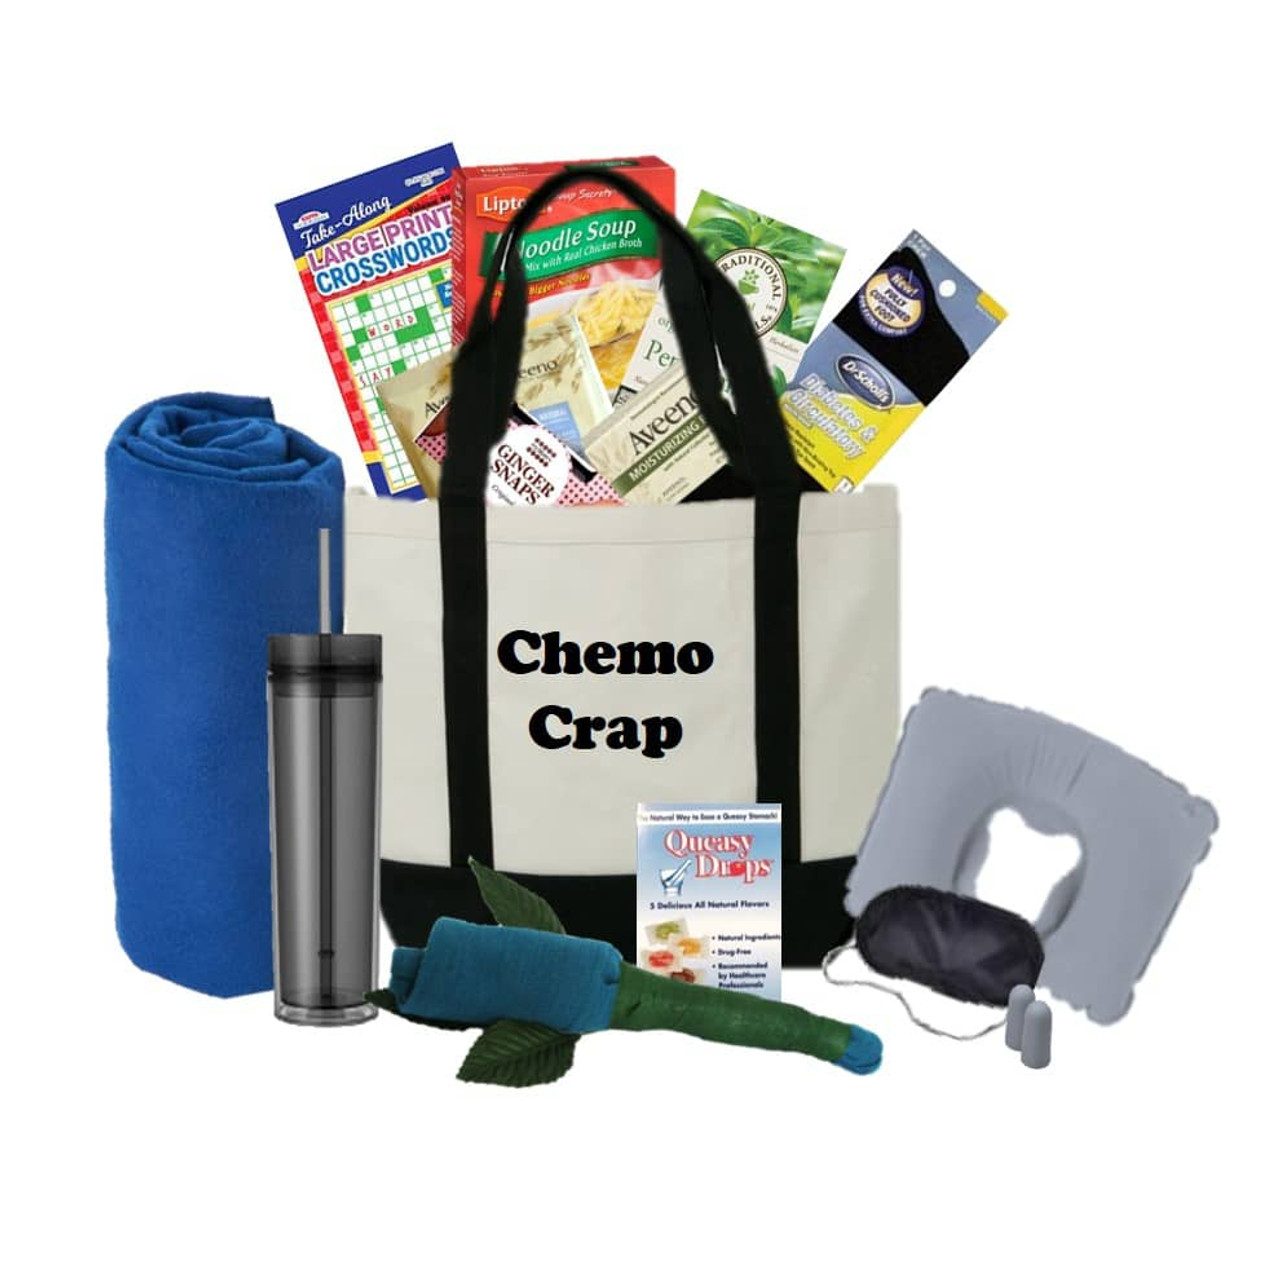 Chemo Crap Cancer Gift For Men - Big Queasy